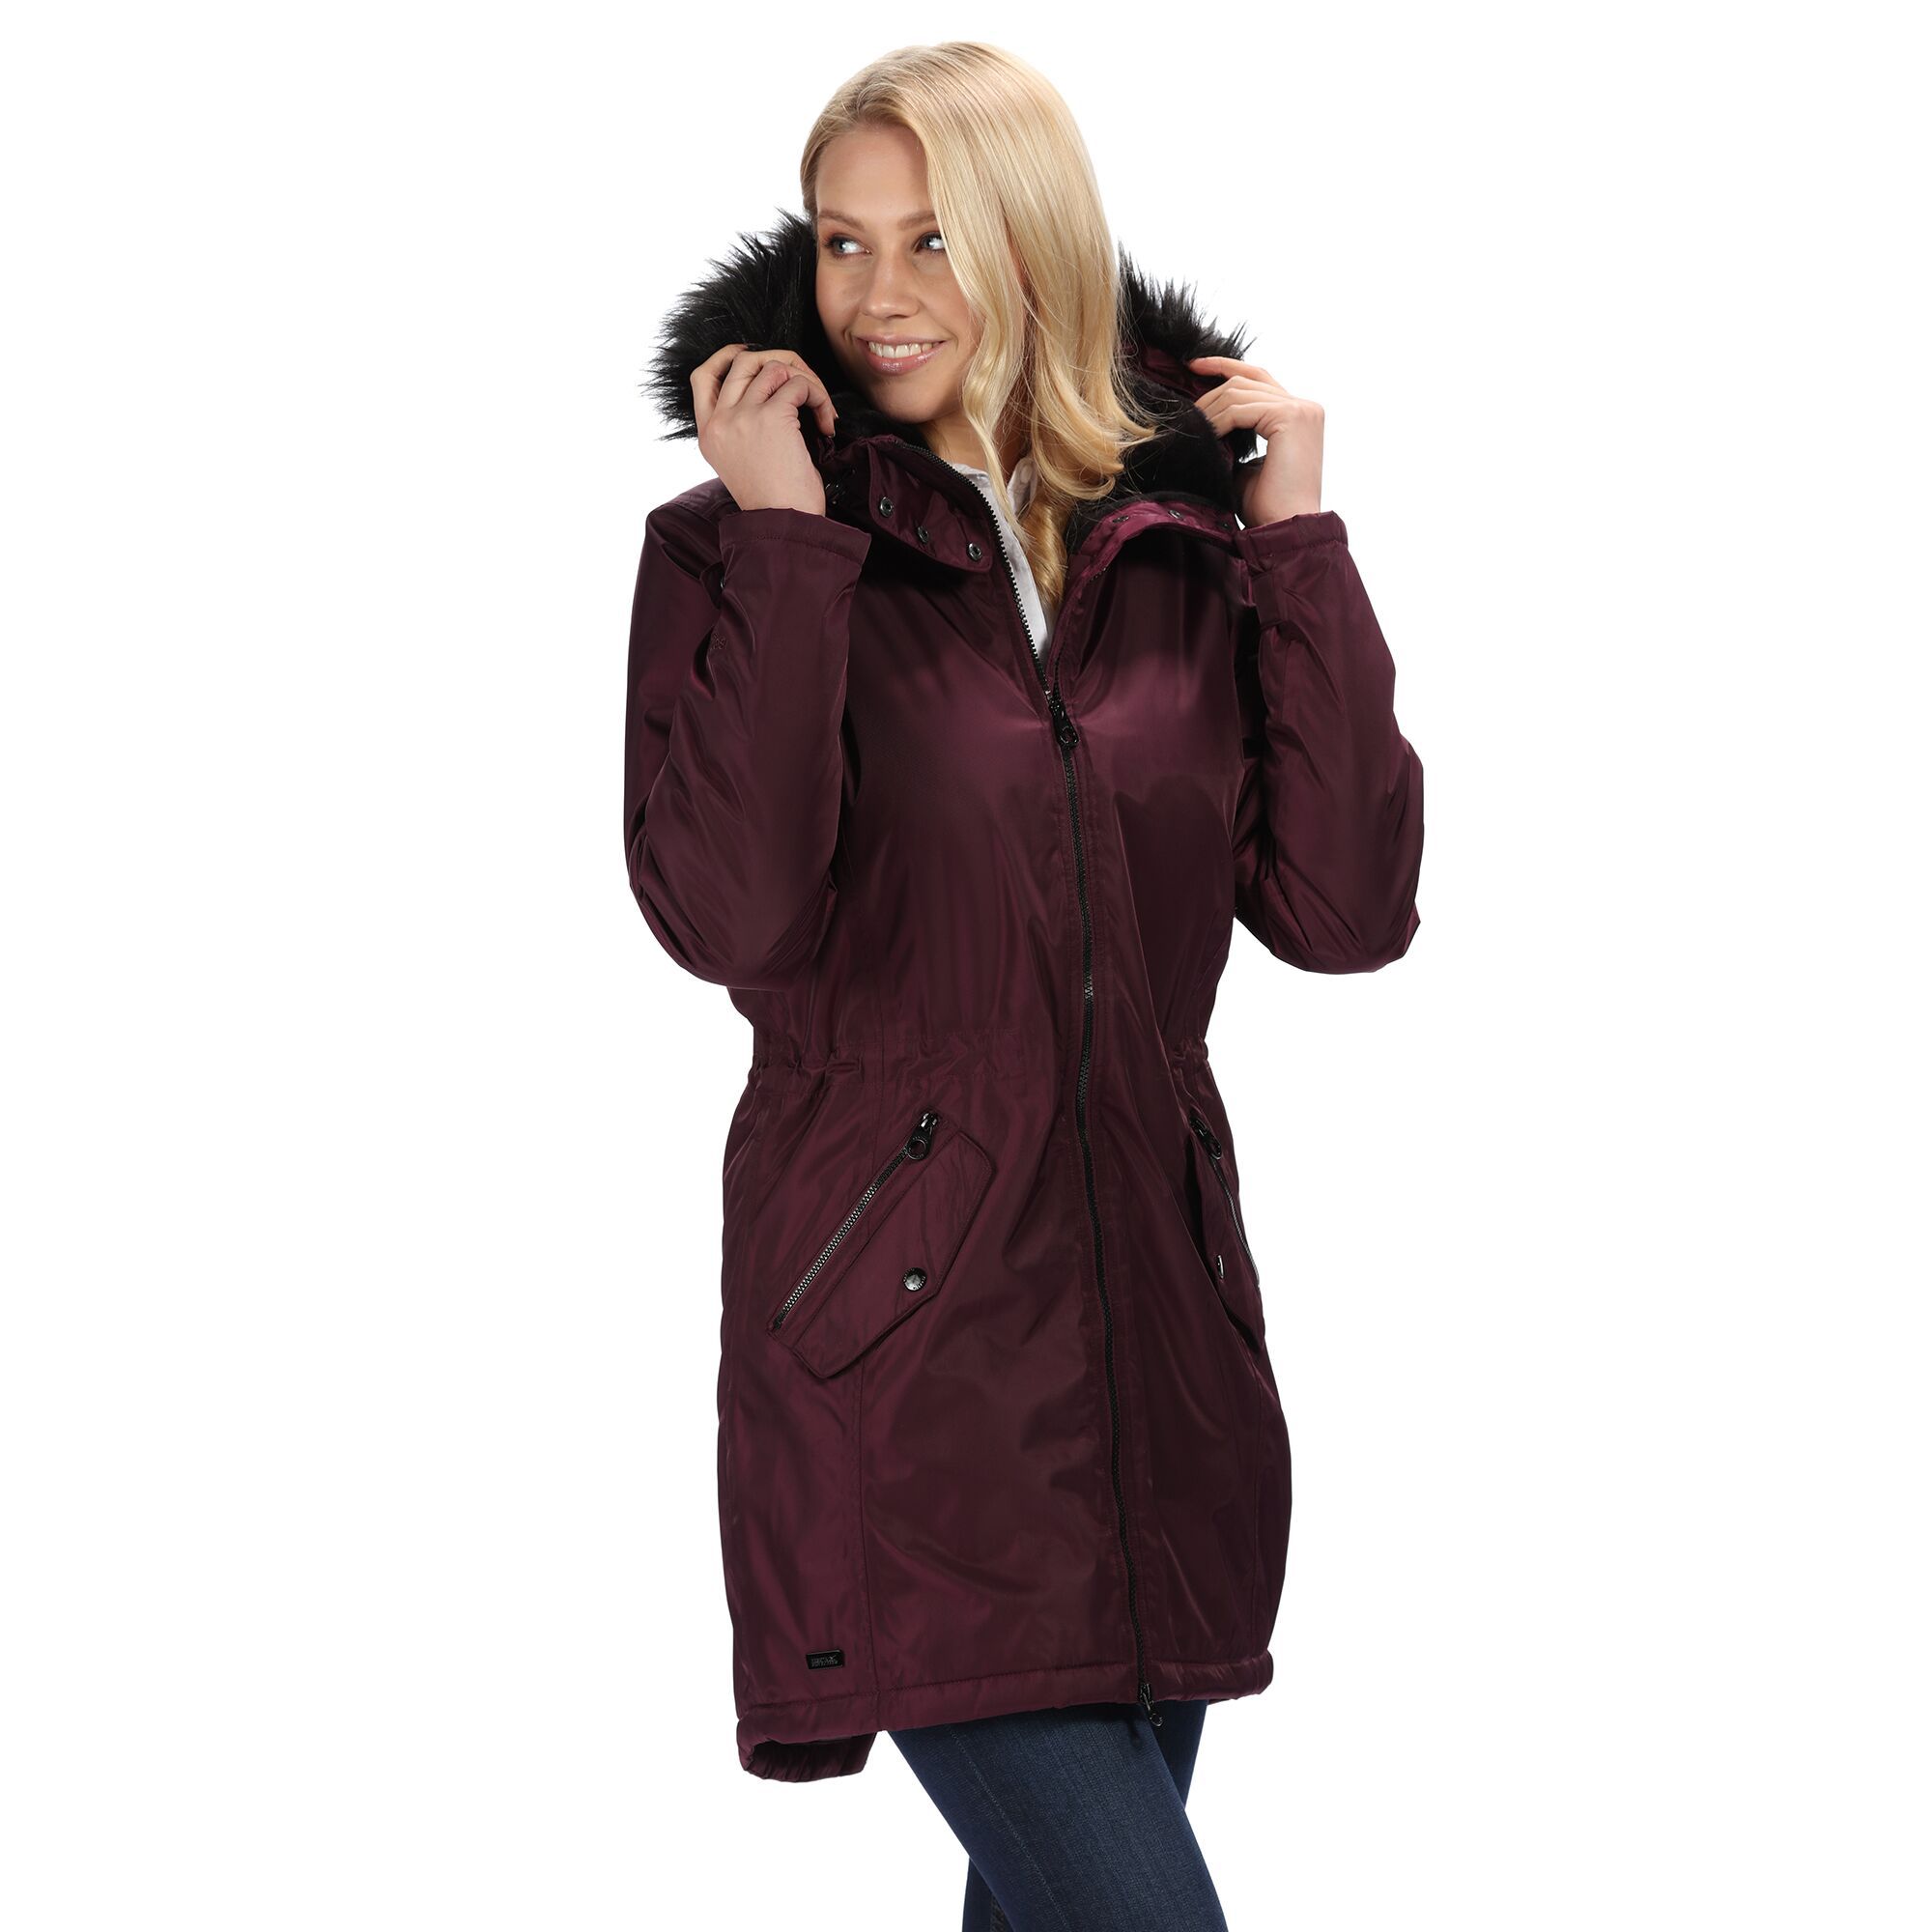 Made with polyester, high shine, twill fabric. Blends technical know-how with a sleek fishtail silhouette and luxurious faux-fur trims. The outer uses high-shine waterproof/breathable Isotex 5000 performance fabric with a DWR (durable water repellent) finish. Features sealed seams to protect in wet or snowy weather. Breathability rating 8,000g/m2/24hrs. The inner is lightly padded with quick-drying Thermoguard insulation for cosy comfort. With an added adjuster on the hood and at the waist for a shapely fit. The front fastens with a two-way zip for added breathability. With poppered cuffs and pockets and the Regatta Outdoors badge on the left sleeve. Has a grown on hood with removable faux fur trim. Also includes 2 zipped lower pockets and 2 lower pockets with flaps and branded snap fastening. Size (chest): (6 UK) 30in, (8 UK) 32in, (10 UK) 34in, (12 UK) 36in, (14 UK) 38in, (16 UK) 40in, (18 UK) 43in, (20 UK) 45in, (22 UK) 48in, (24 UK) 50in, (28 UK) 54in, (30 UK) 56in, (32 UK) 58in, (34 UK) 60in, (36 UK) 62in.